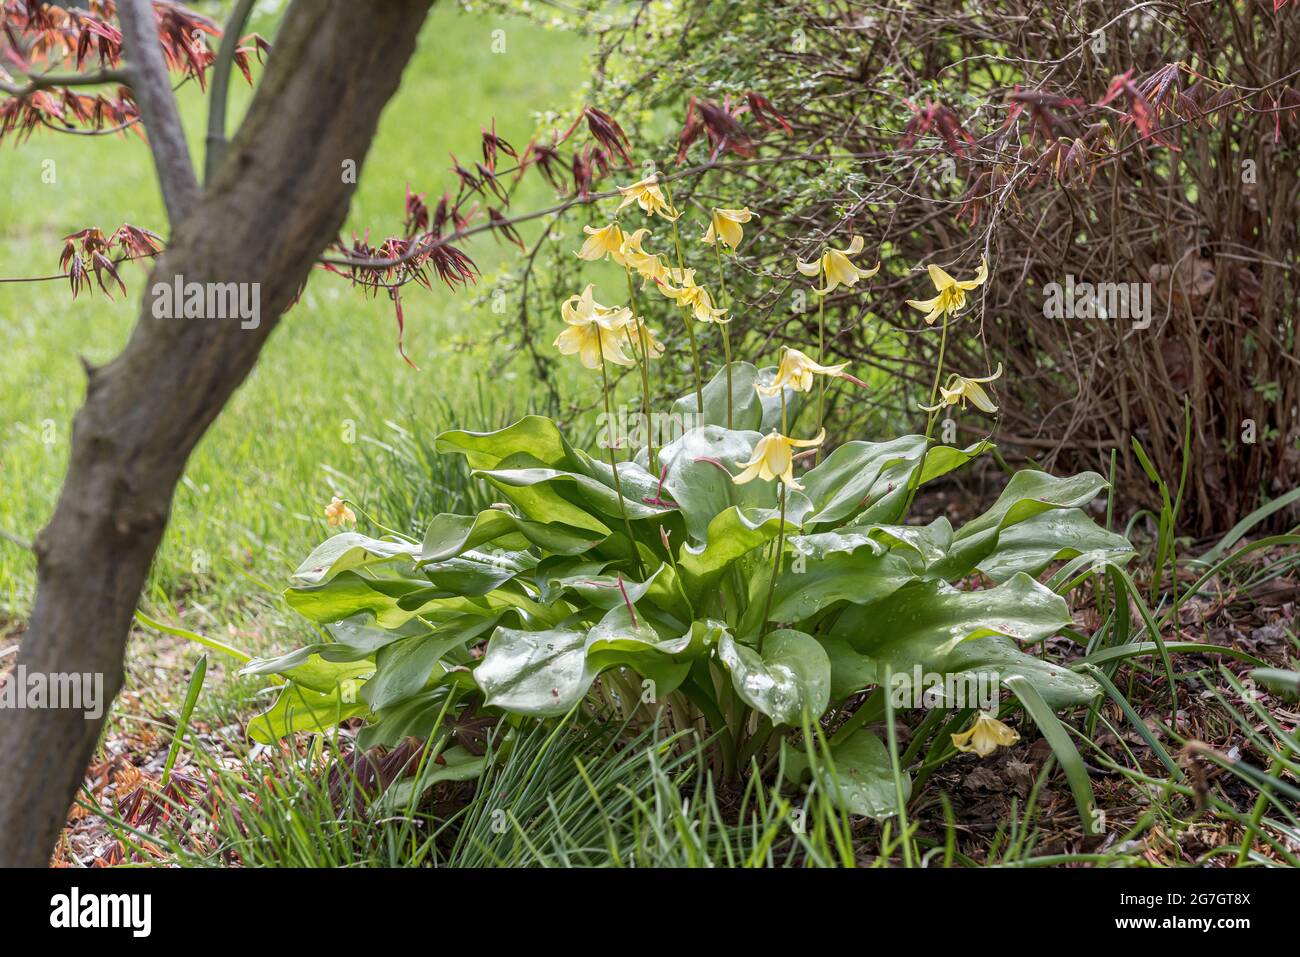 fawn lily, trout lily, dog's-tooth violet, adder's tongue (Erythronium 'Pagoda', Erythronium Pagoda), blooming, cultivar Pagoda, Germany Stock Photo